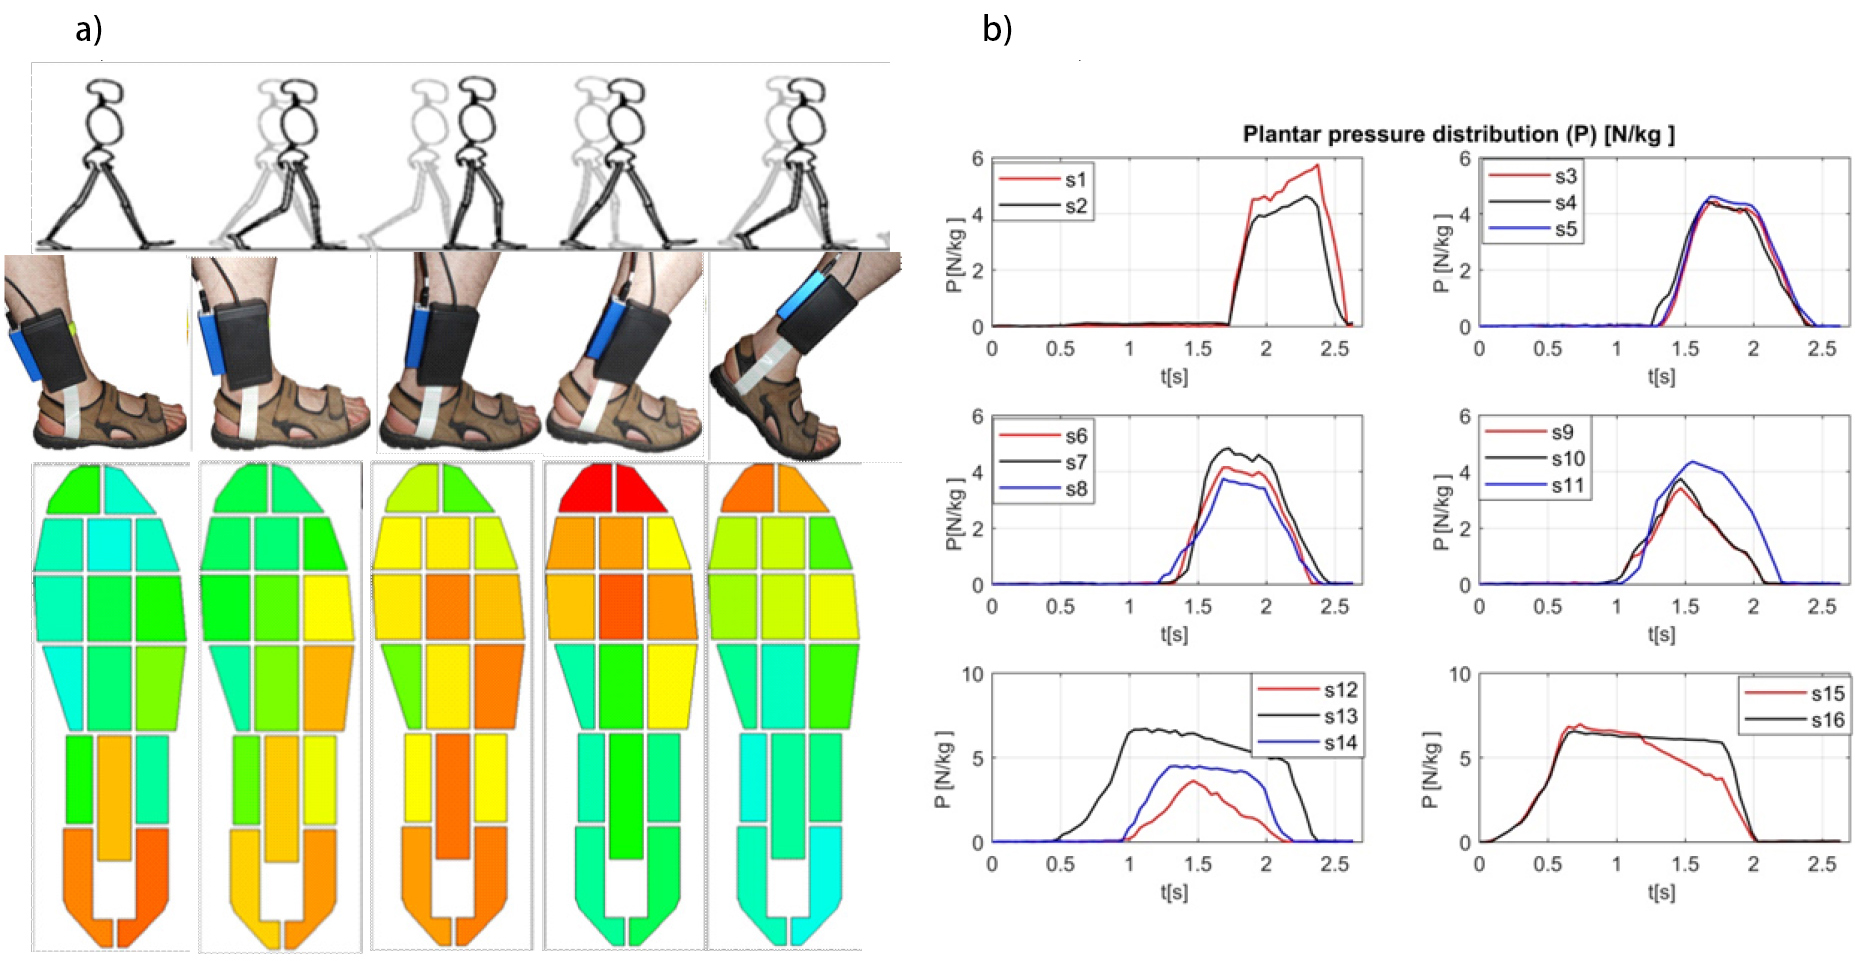 The experimental setup with images of plantar pressure during gait. a) The experiment, b) plantar pressure distribution for a typical man during walking. t is the time elapsed from heel contact to toe-off. s1–s16 – sensors.